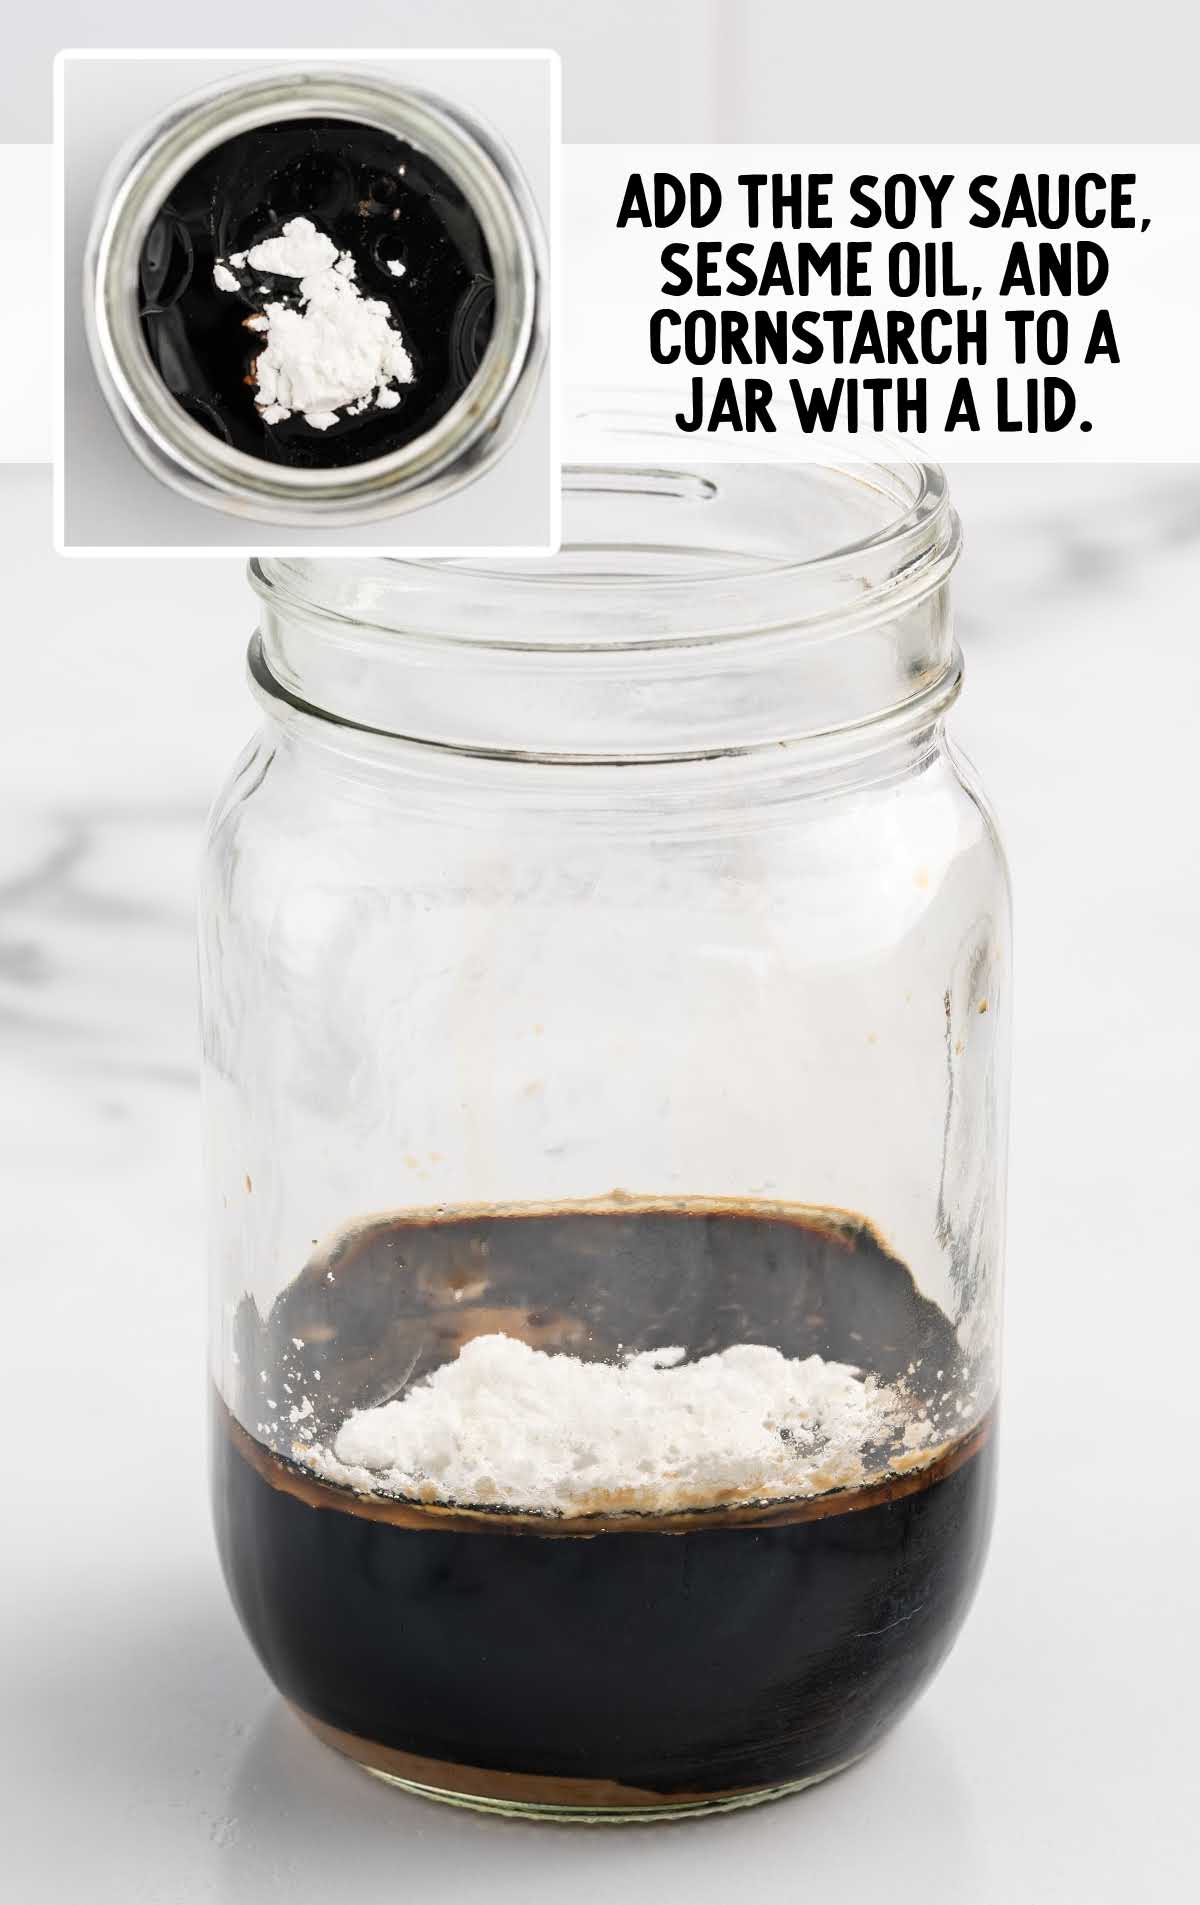 soy sauce, sesame oil, and cornstarch added to a jar